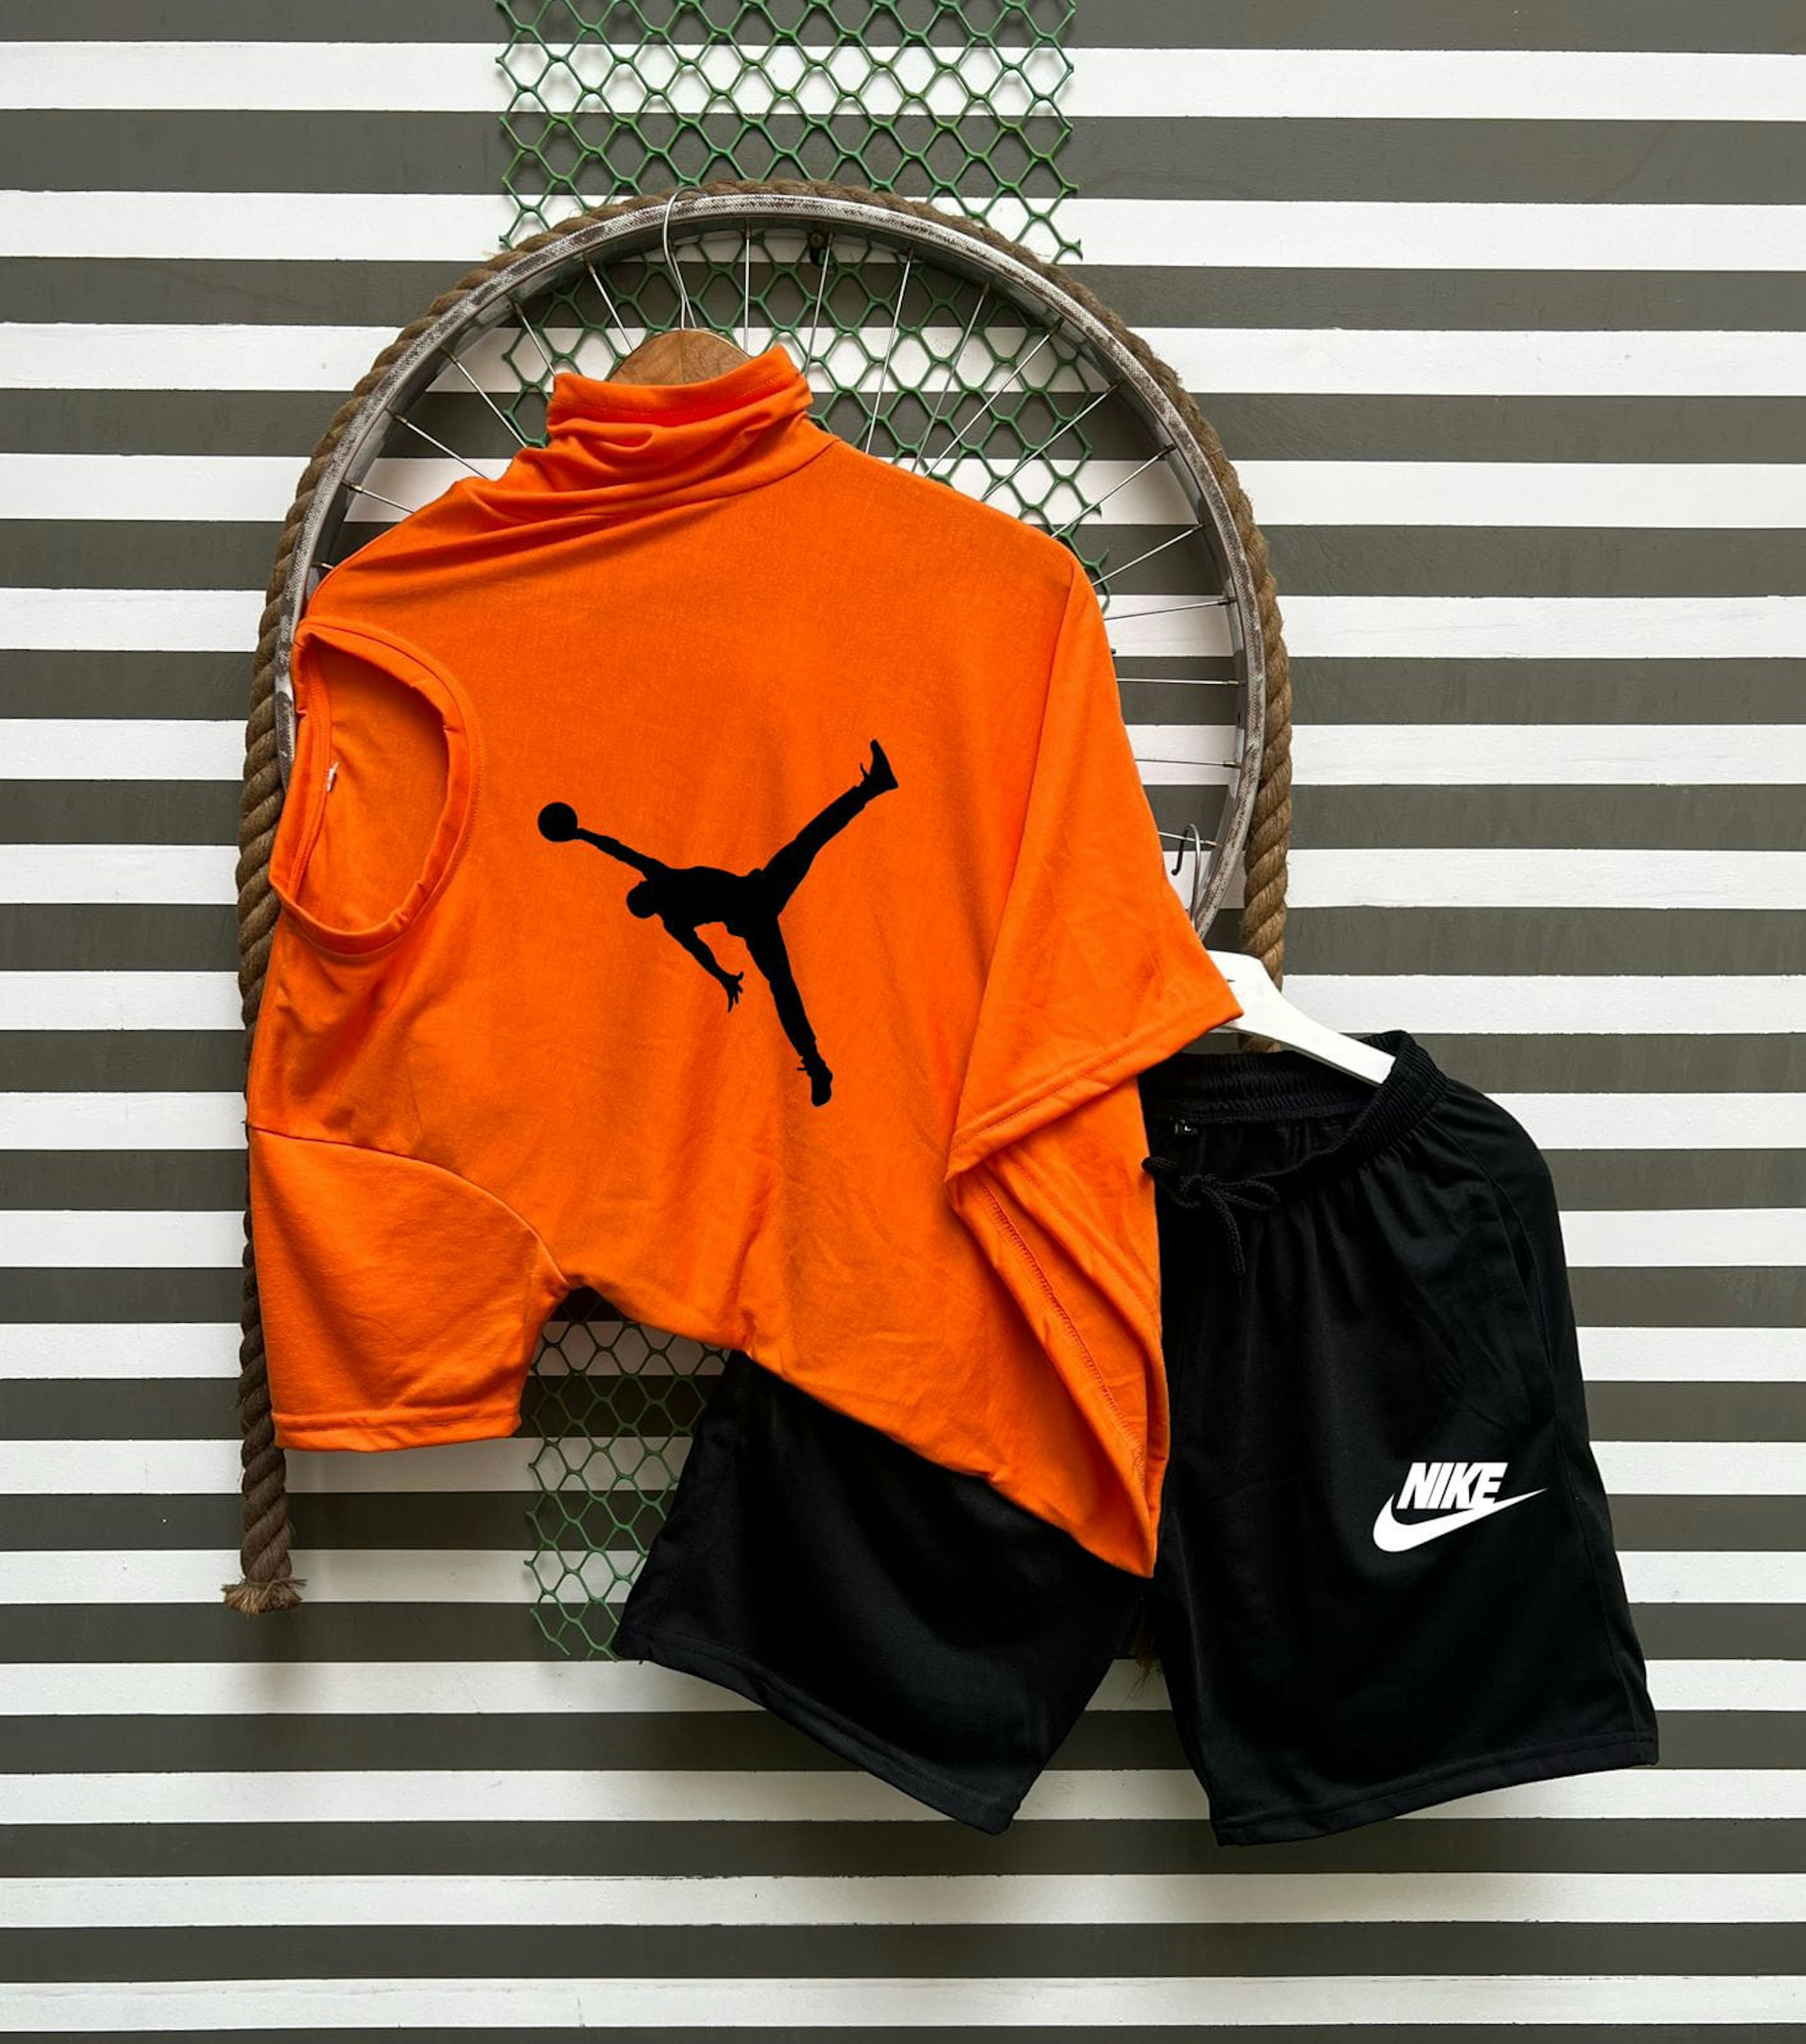 View - Nike T-SHIRTS AND SHORTS COMBO photos, Nike T-SHIRTS AND SHORTS COMBO available in Vadodara, make deal in 445